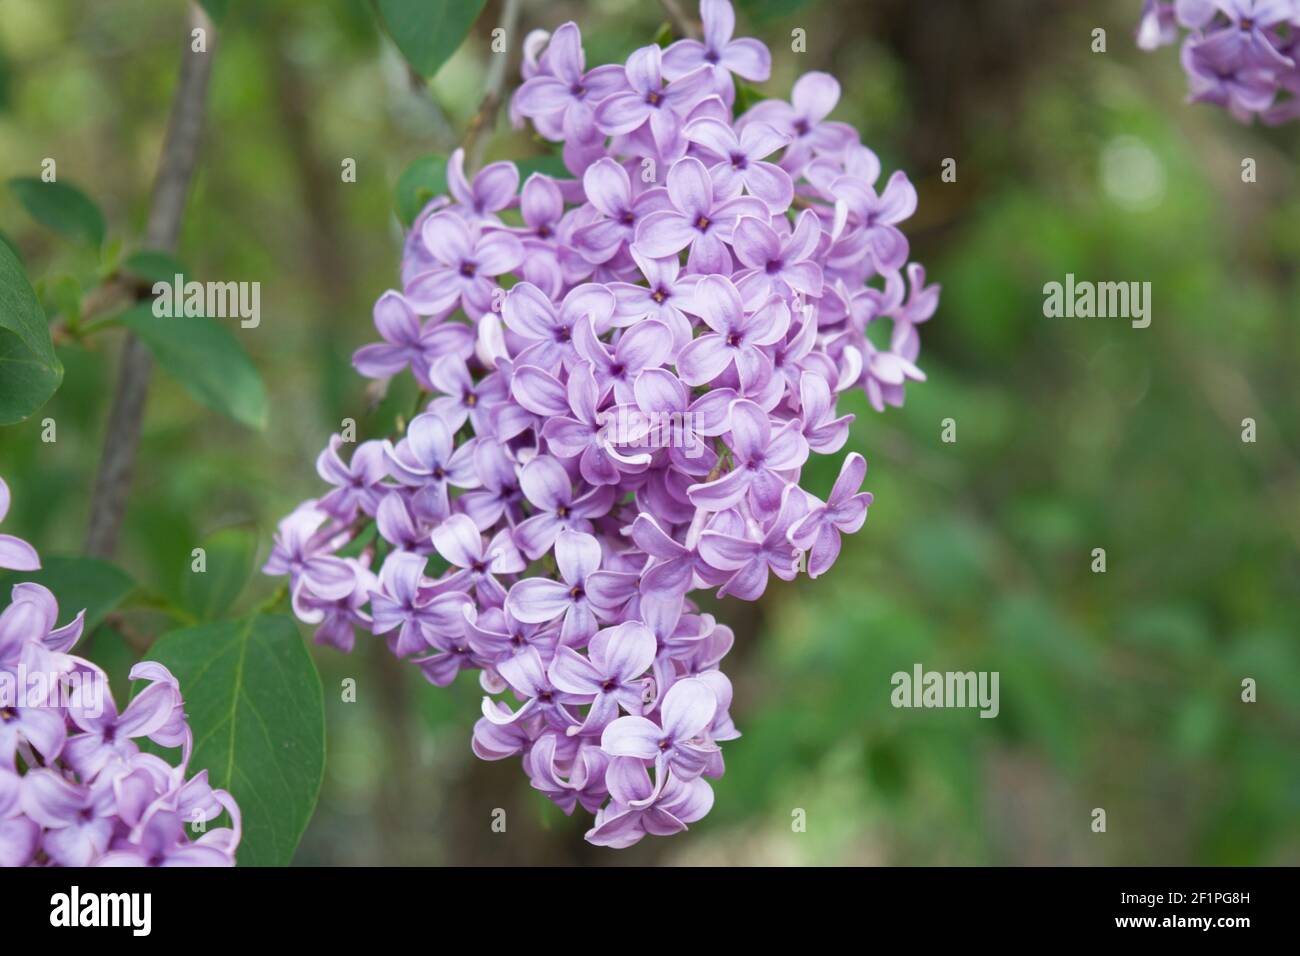 The lilac or common lilac is a species of flowering plant in the olive family. The lilac is a very popular ornamental plant in gardens and parks. Stock Photo